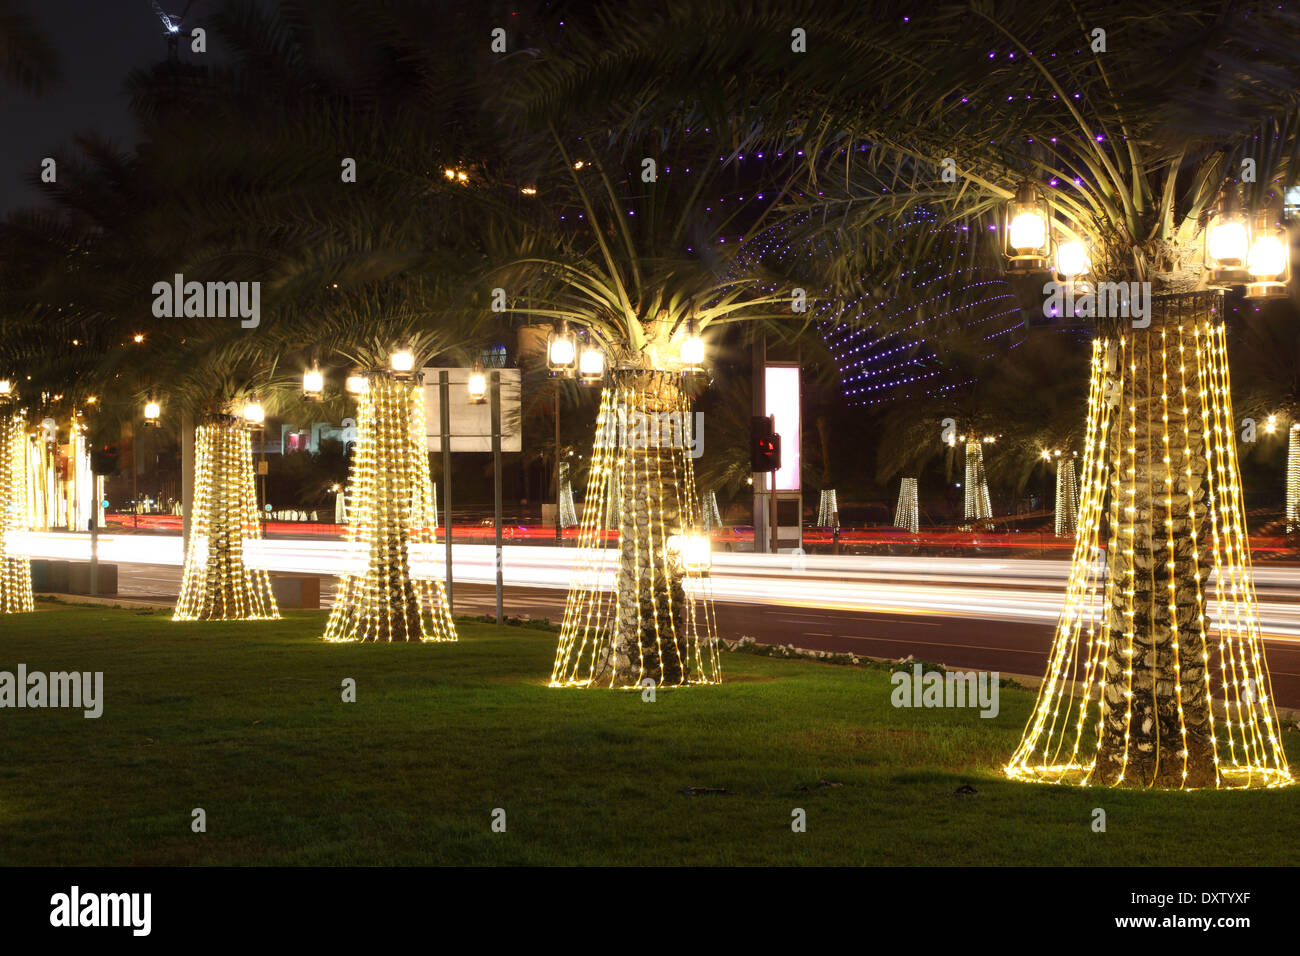 Illuminated palm trees at the corniche in Doha. Qatar, Middle East Stock Photo